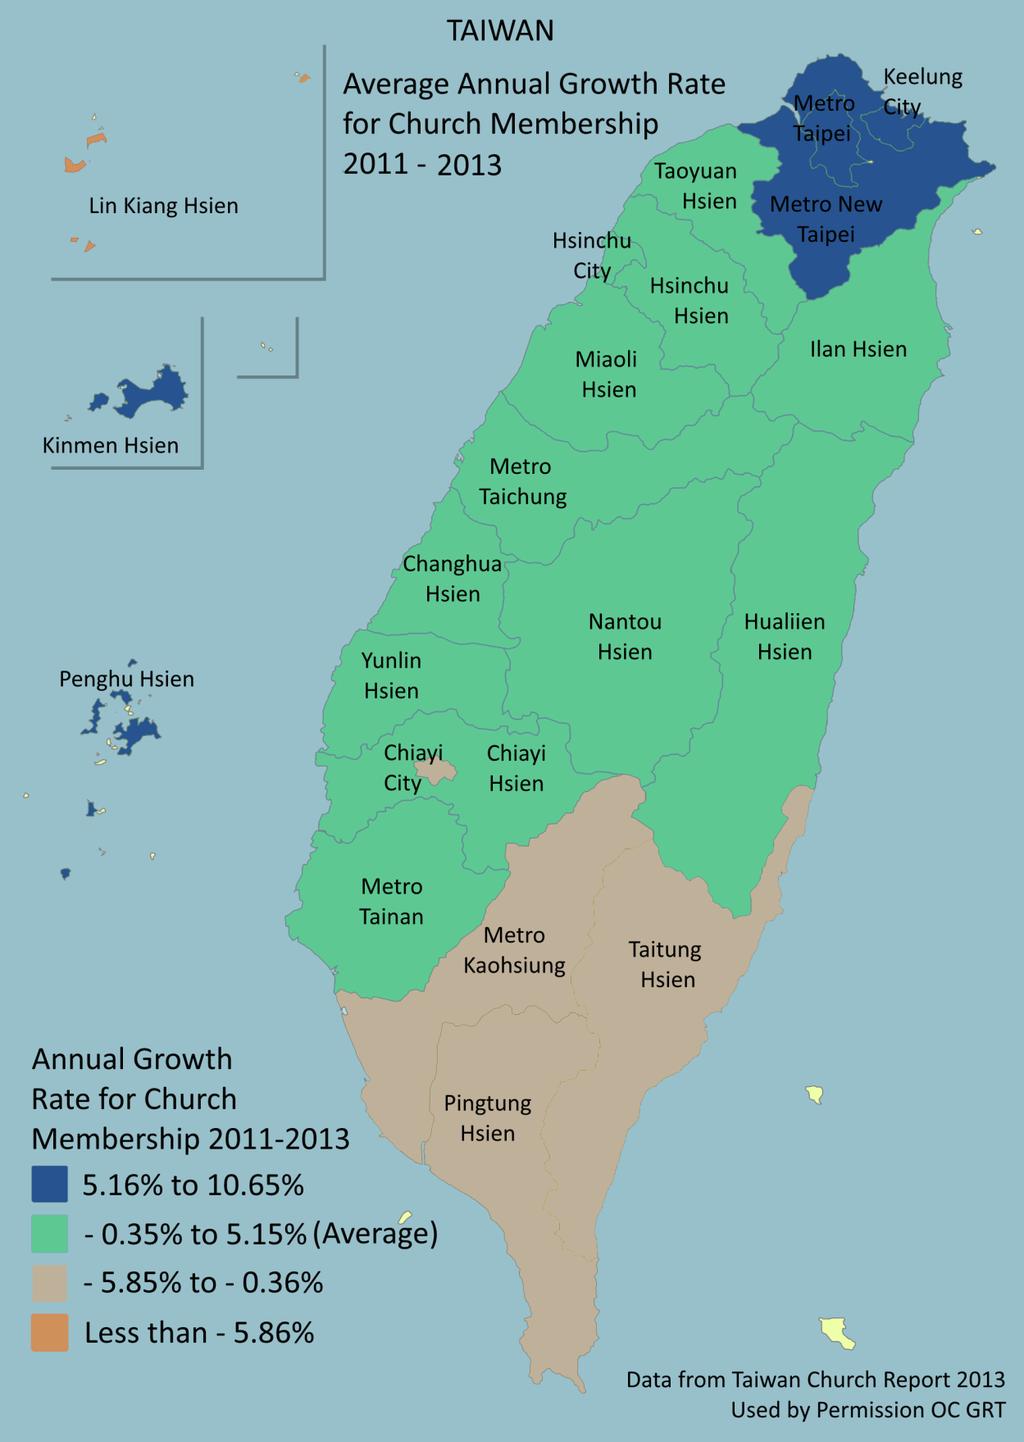 Map 2: Average Annual Growth Rate